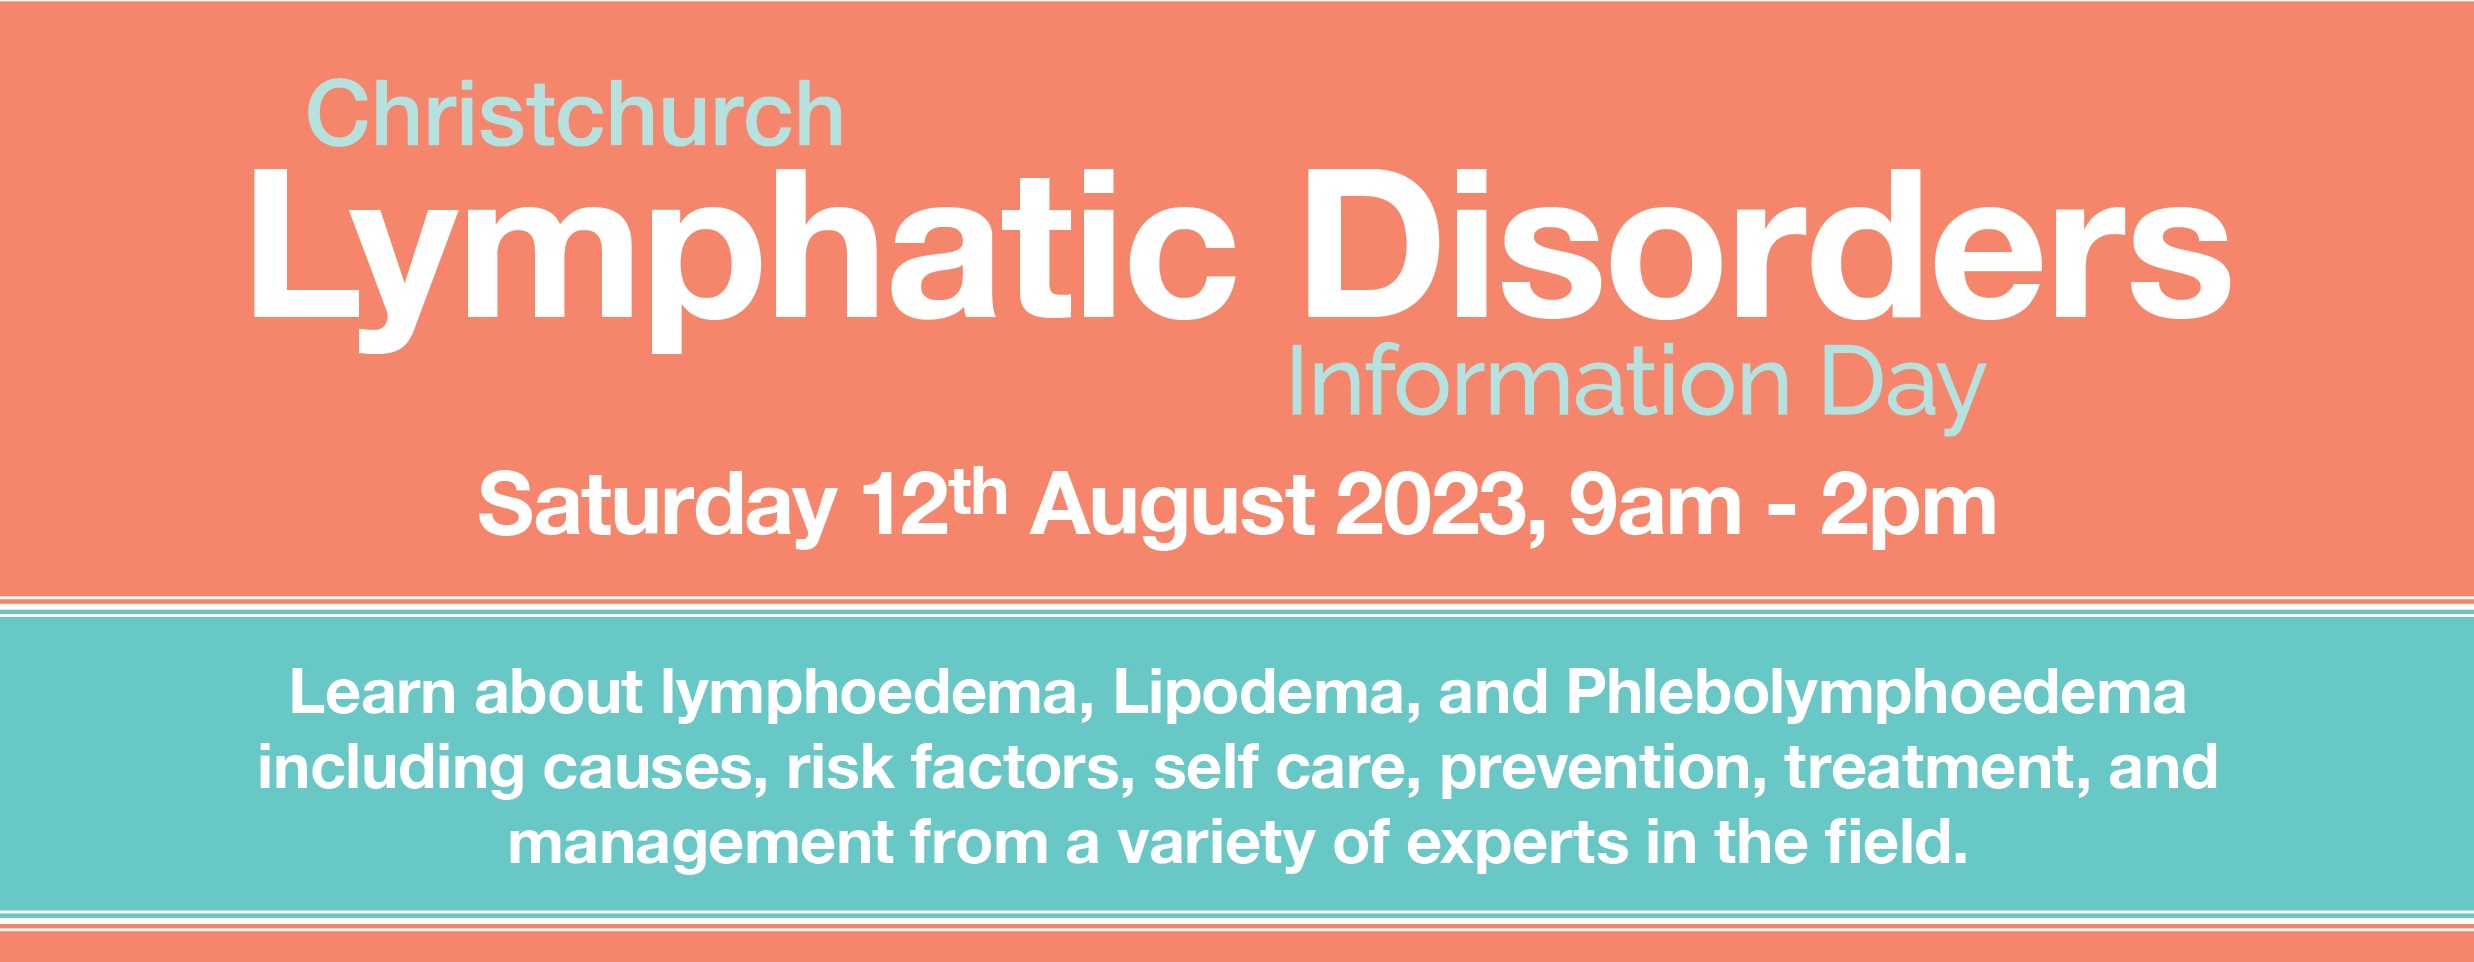 Christchurch Lymphatic Disorders Info Day